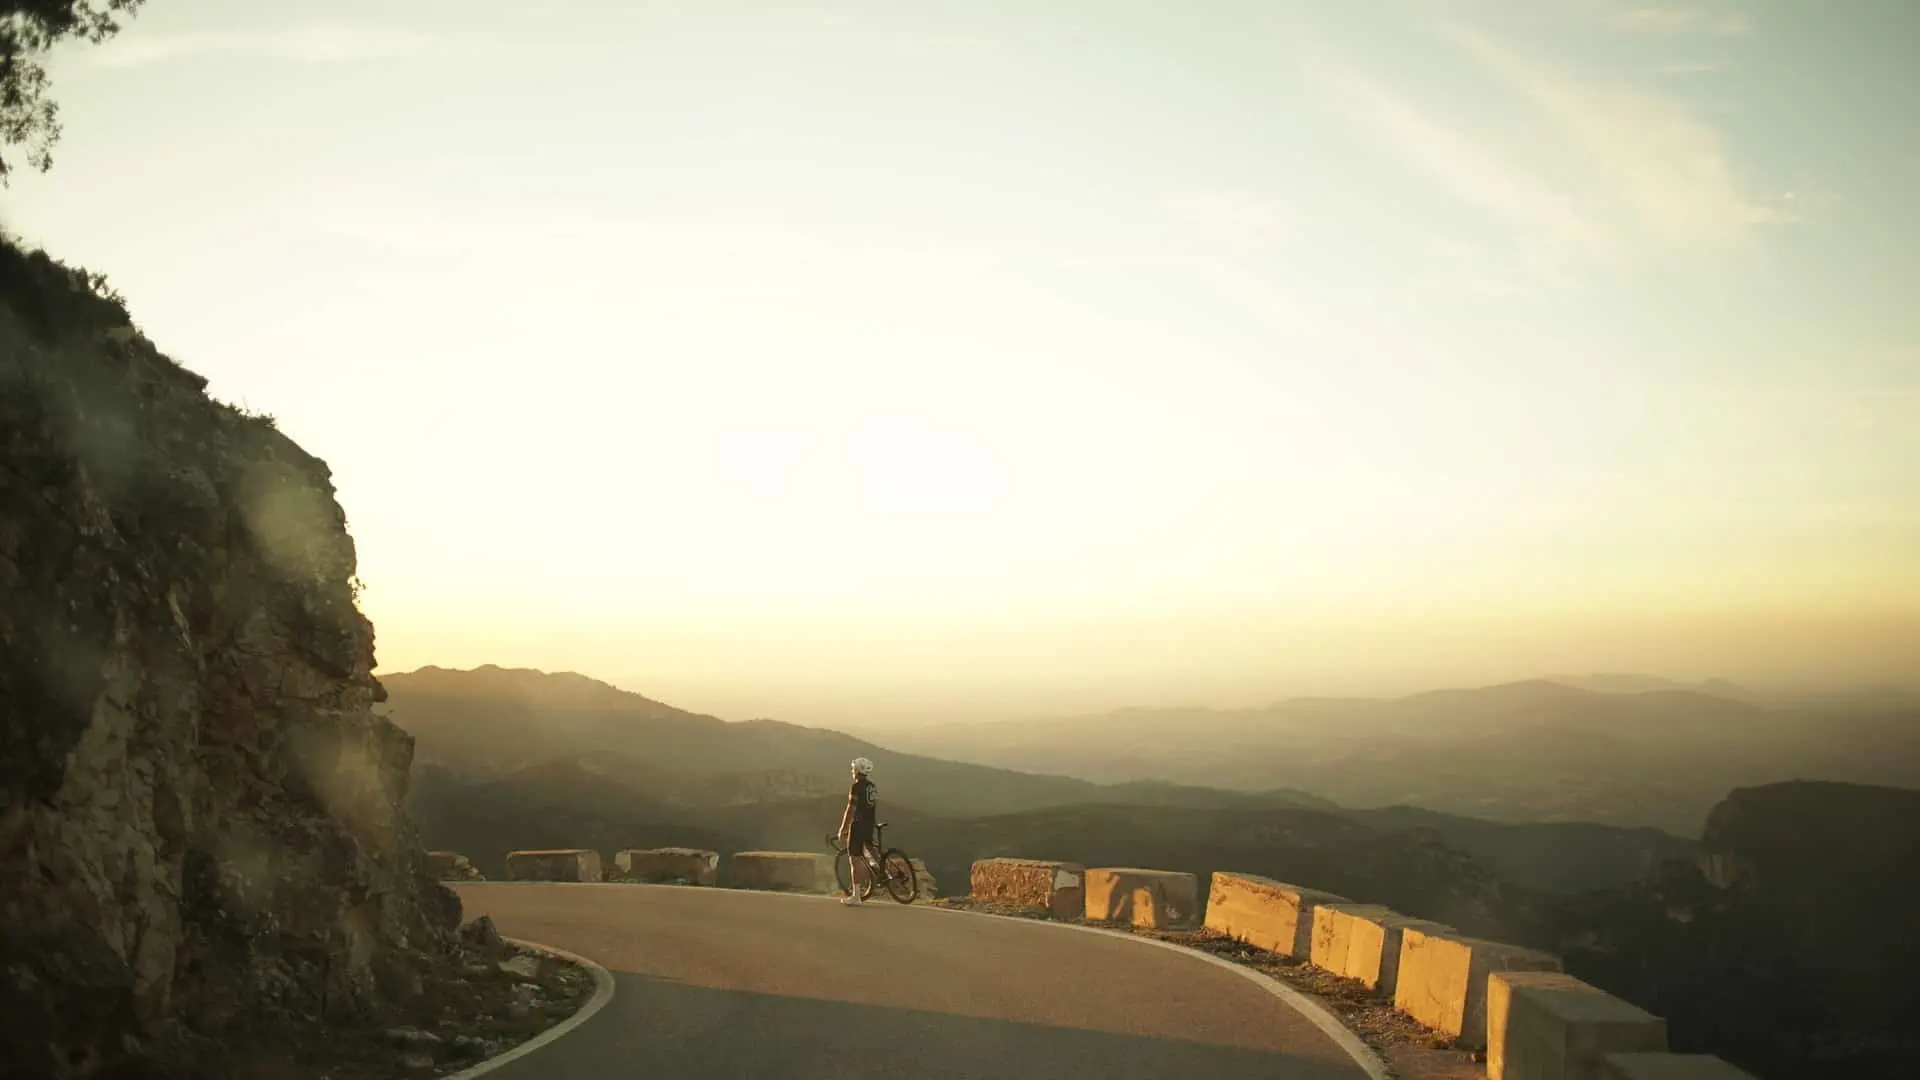 Soak in Andalucía's light and warm temperatures that make for a cycling destination.